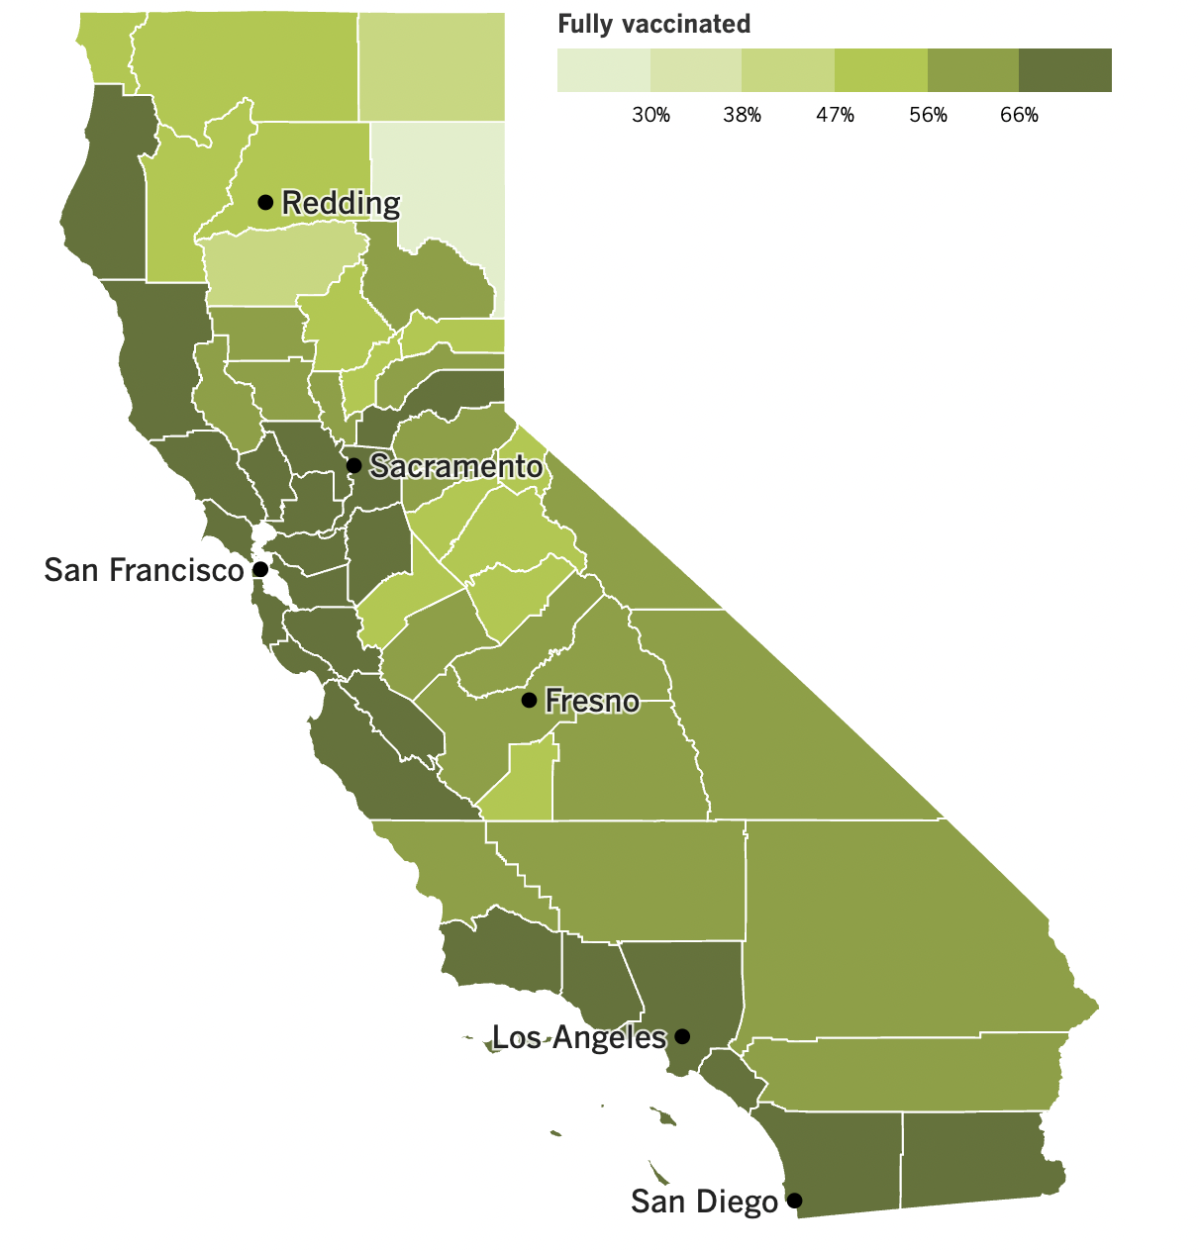 A map showing California's COVID-19 vaccination progress by county as of Jan. 10, 2023.